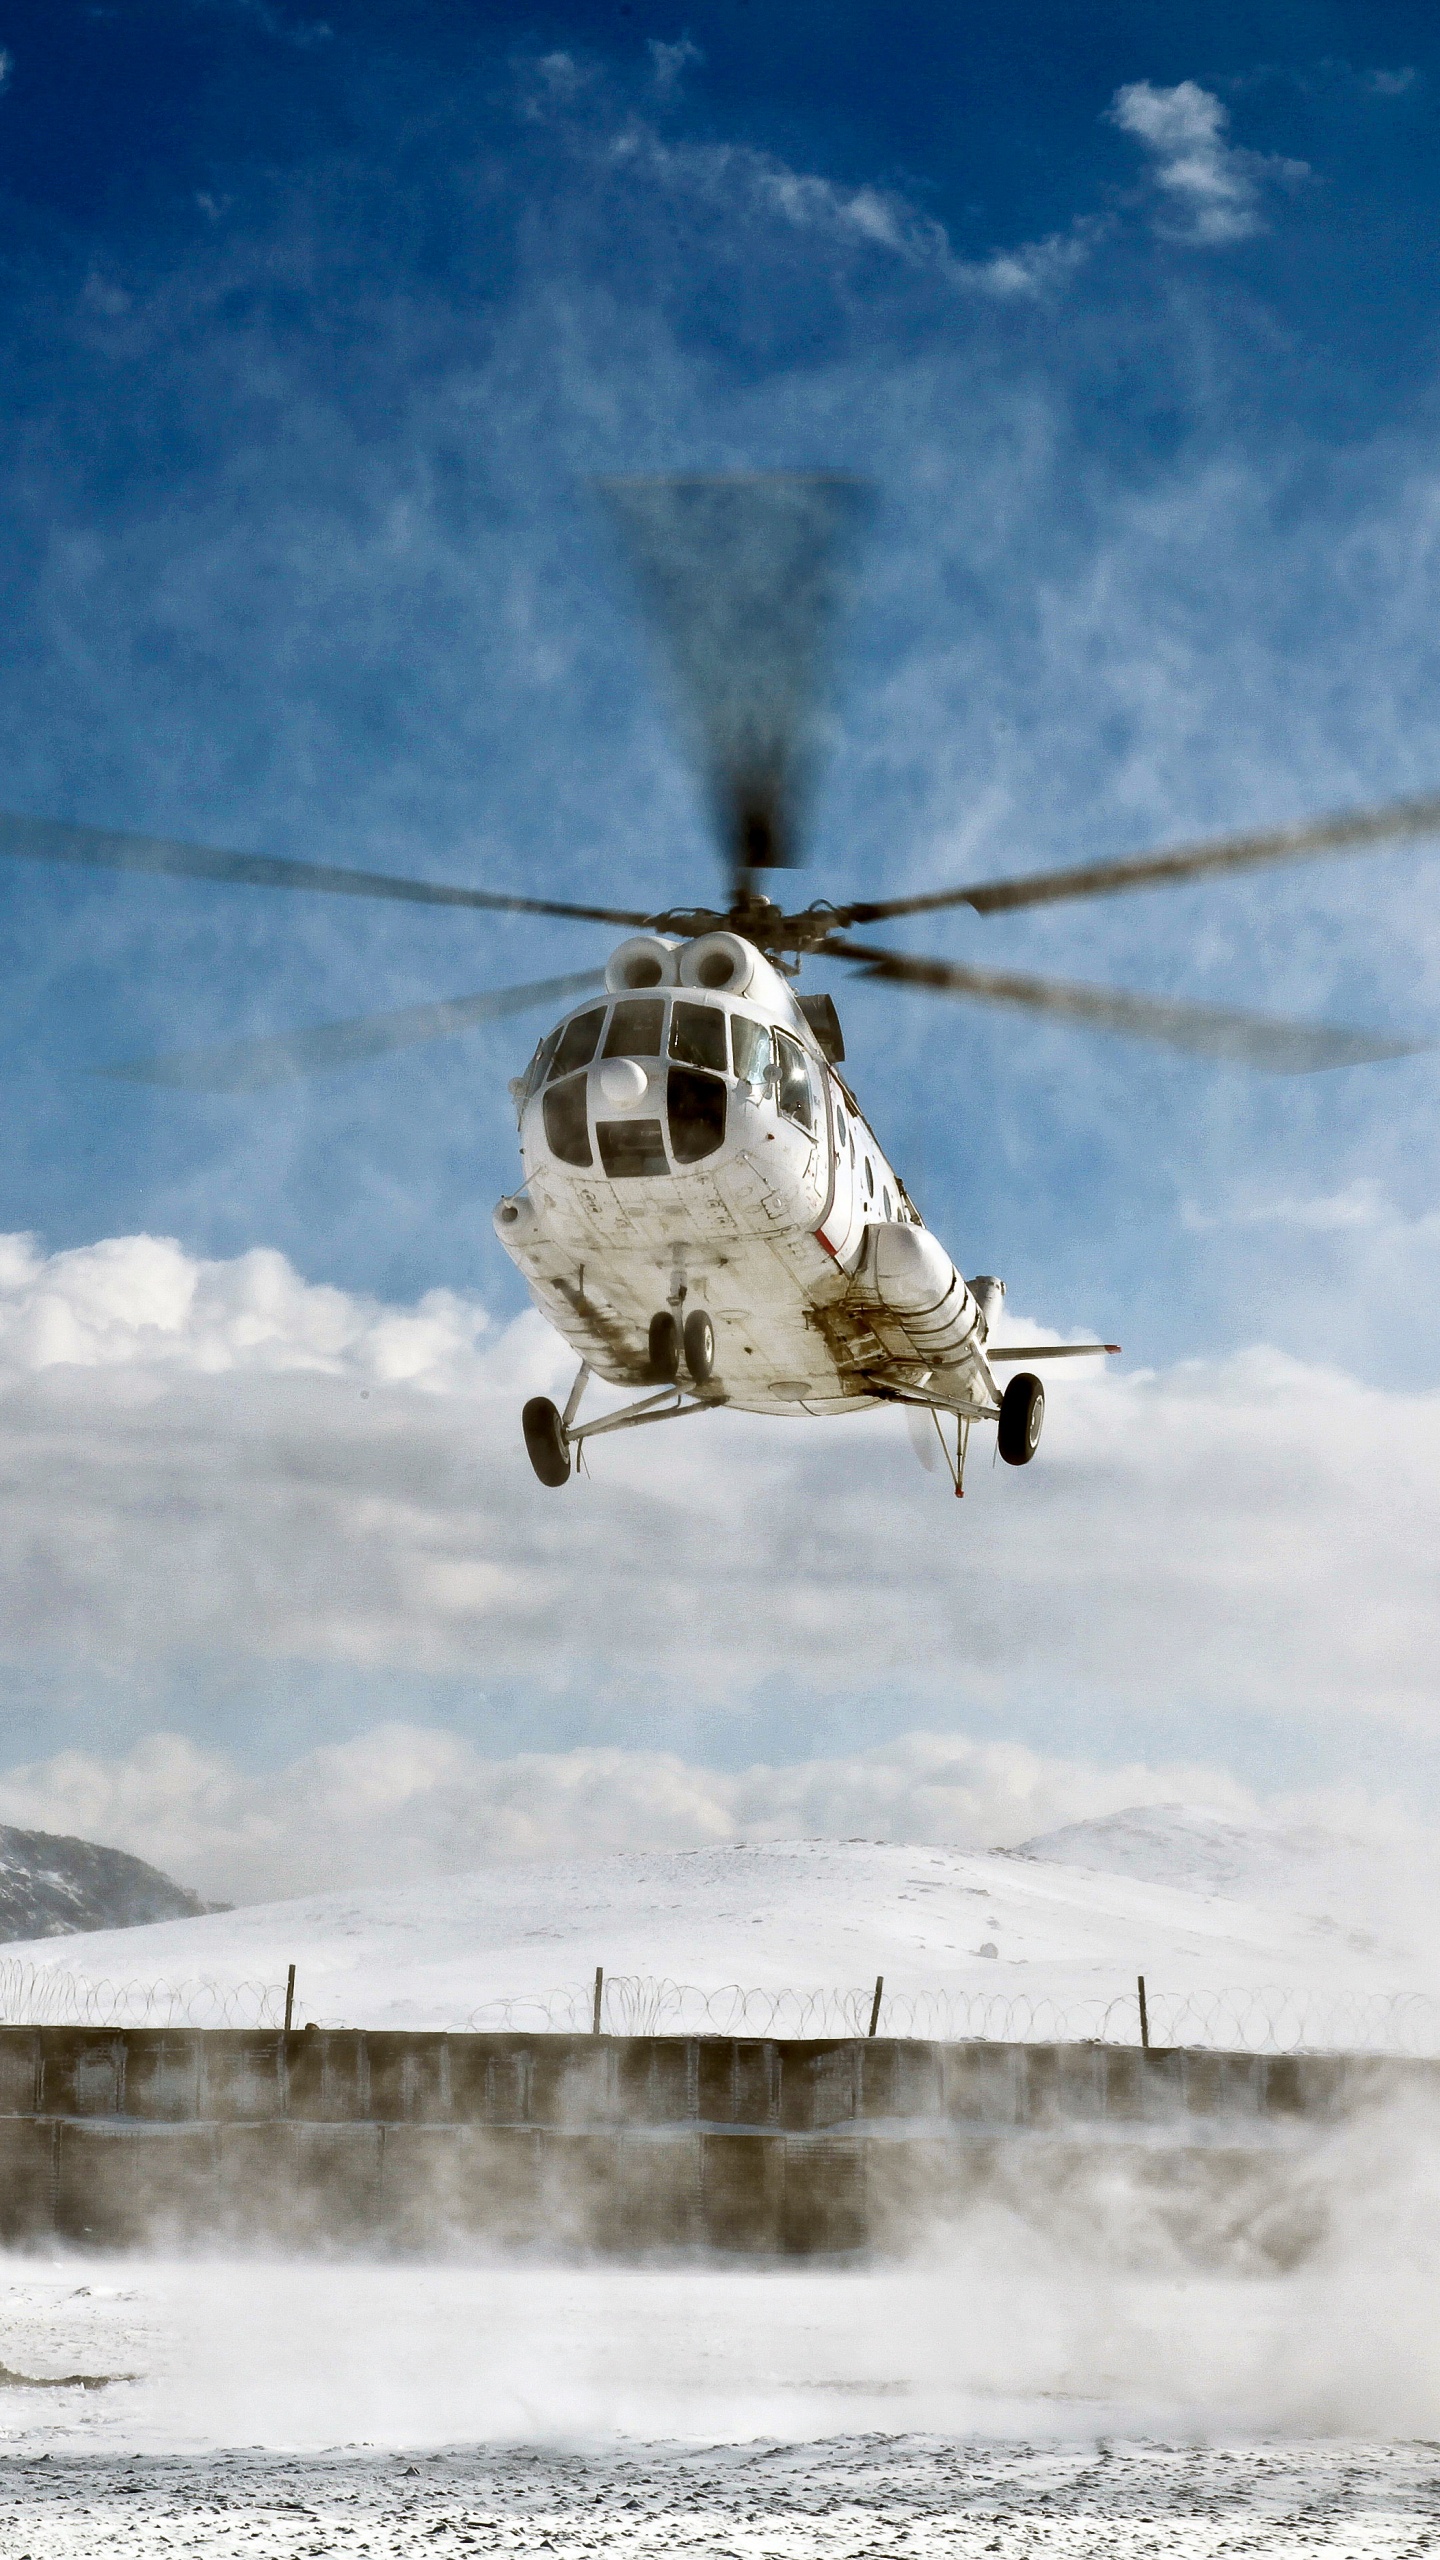 White and Black Helicopter Flying Over Snow Covered Mountain During Daytime. Wallpaper in 1440x2560 Resolution